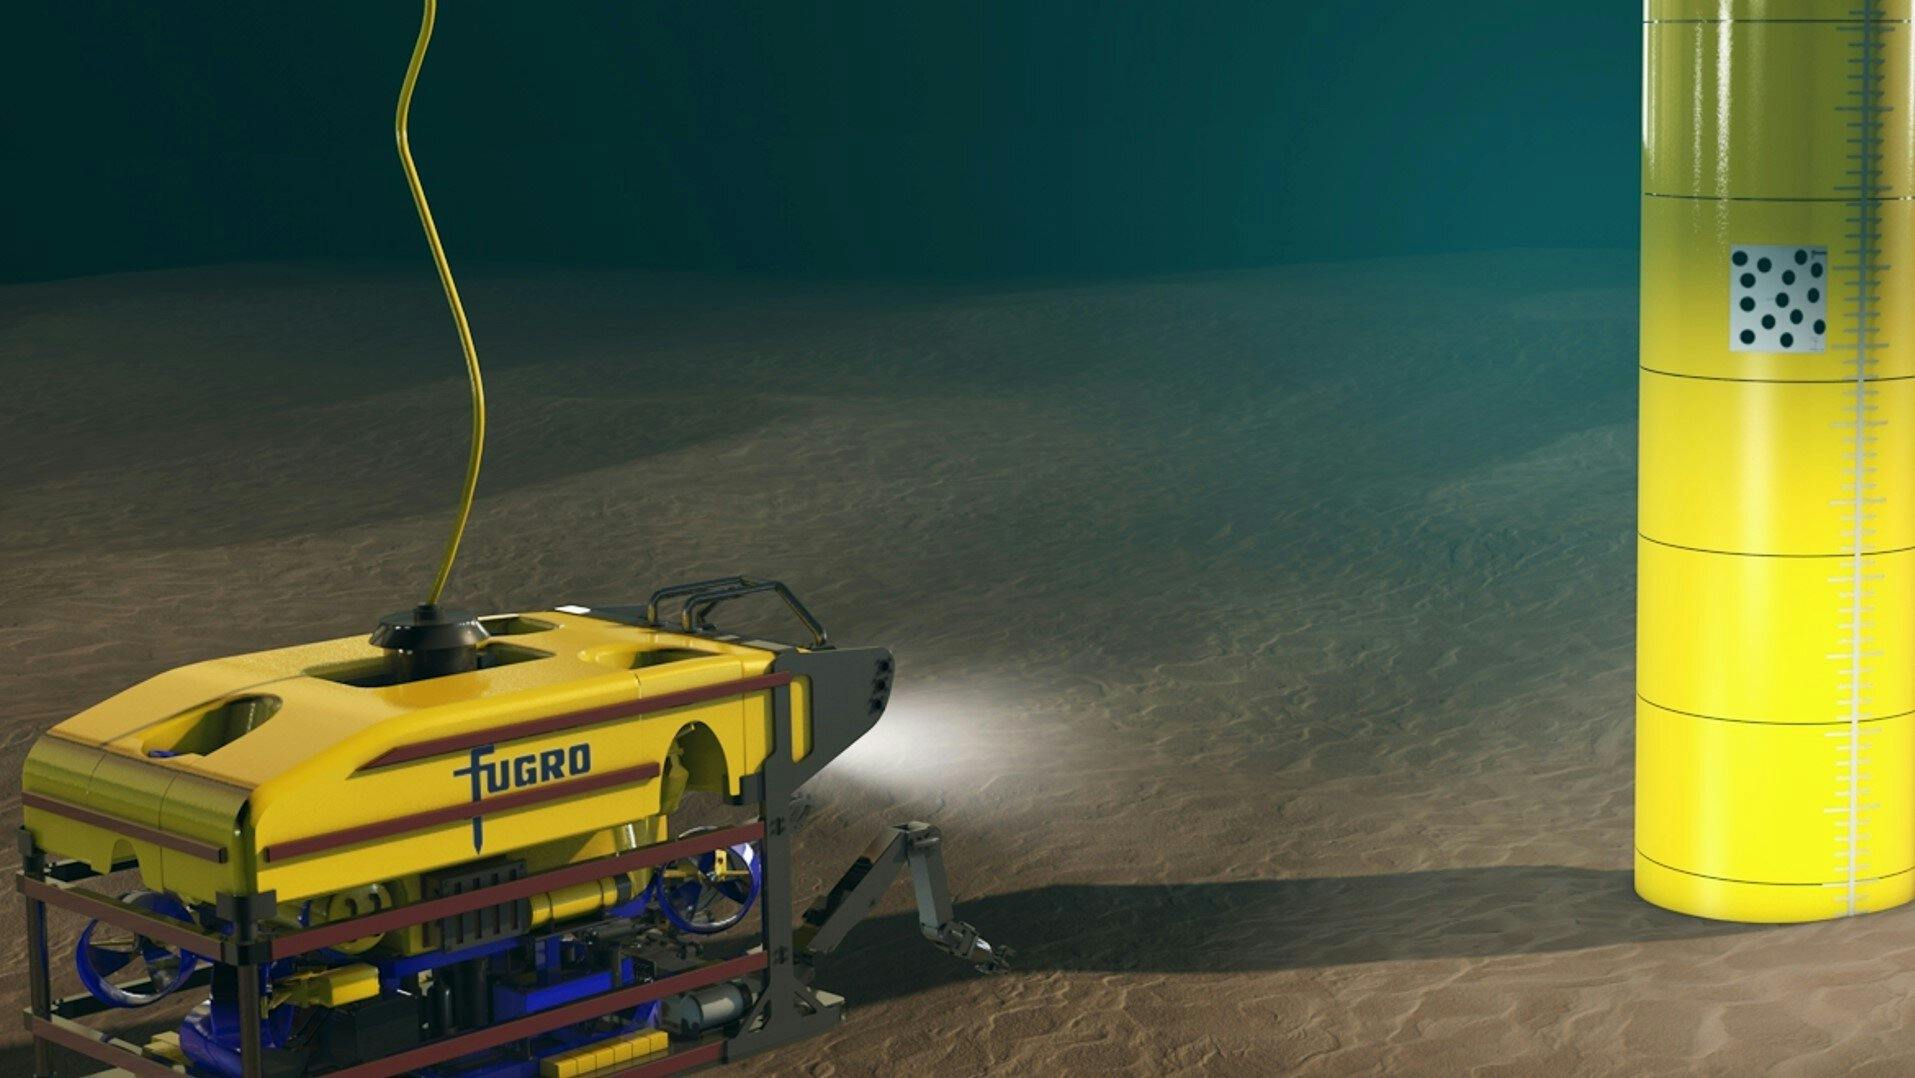 3D rendering showing the positioning of a subsea structure using QuickVision�, Fugro's contact-less vision based (subsea) positioning and Augmented Reality measurement tool.